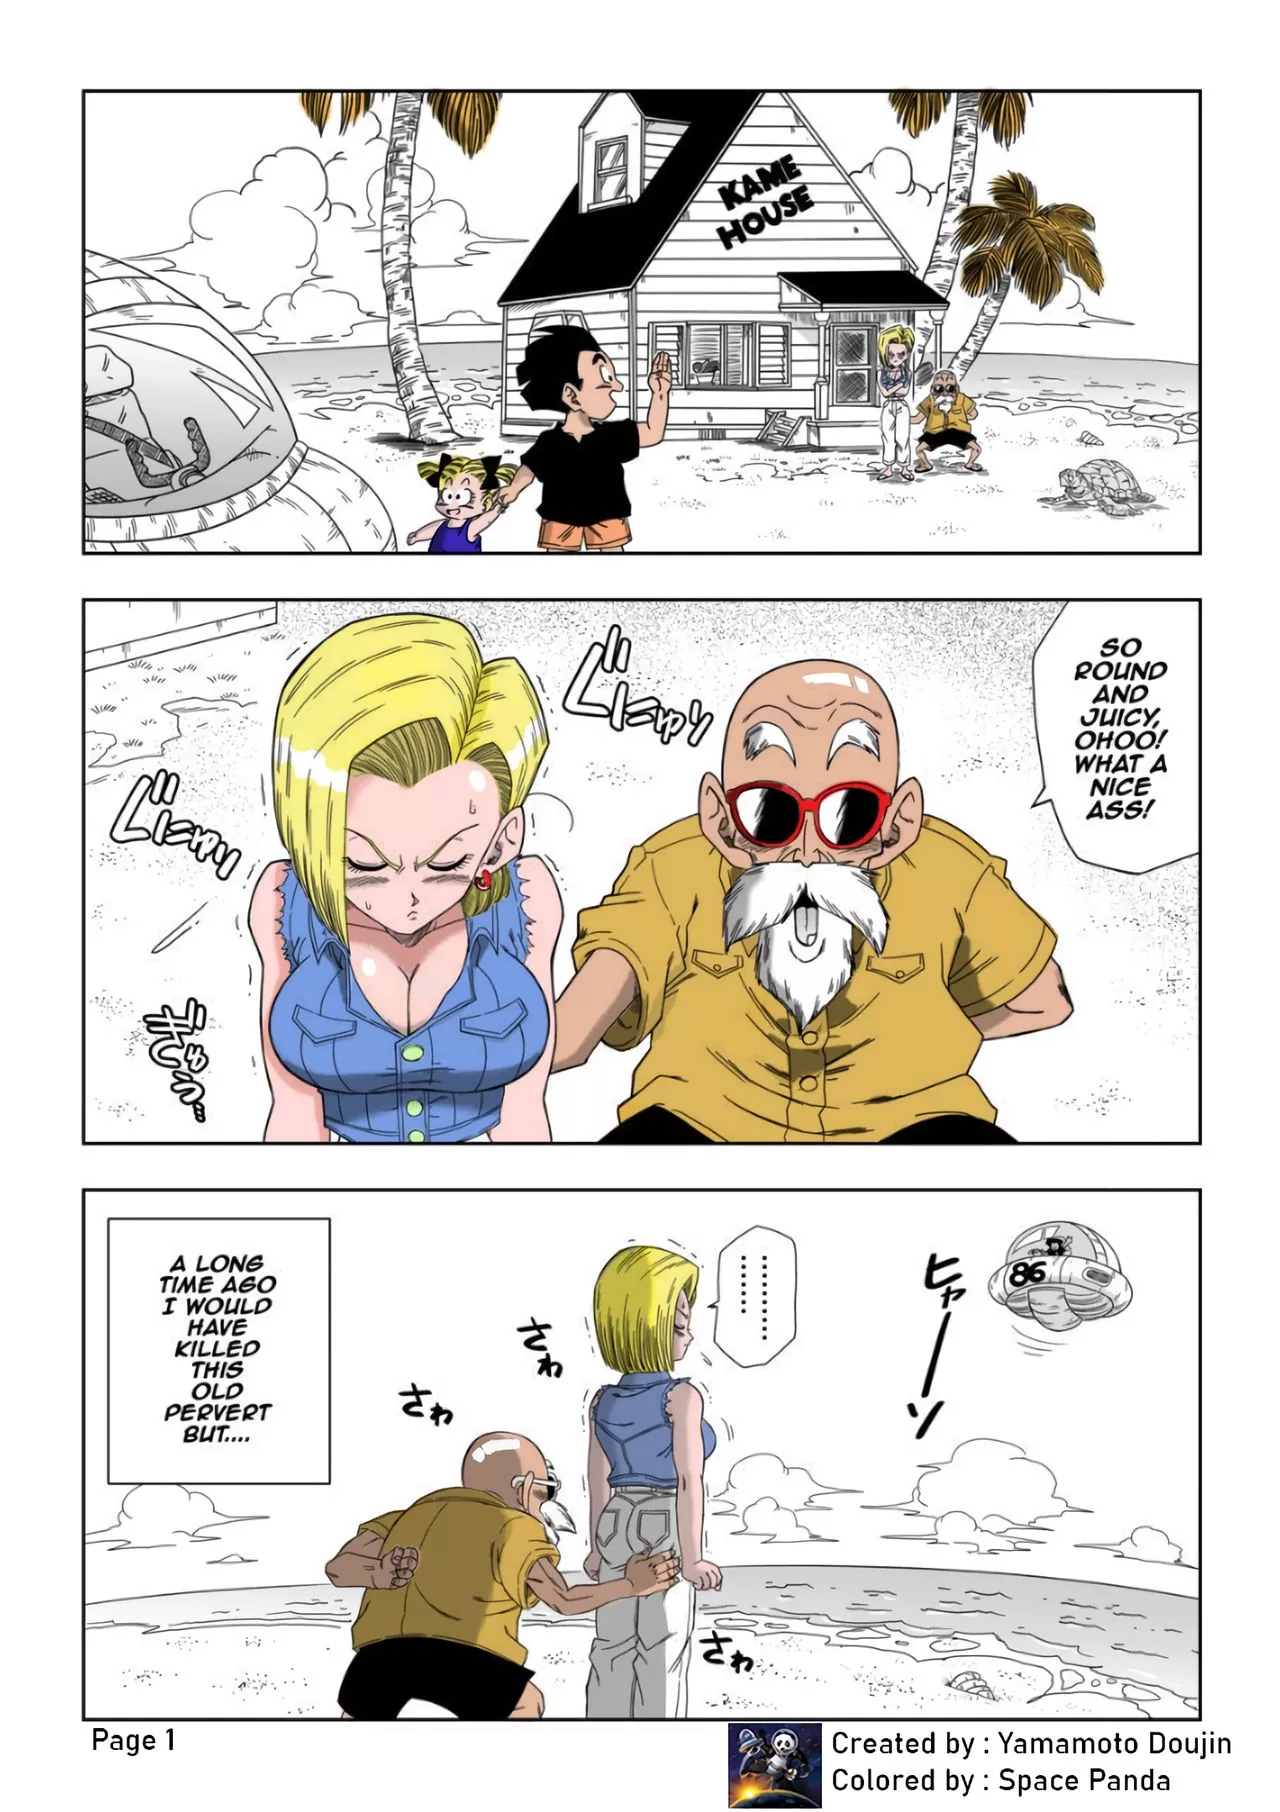 Dragon Ball Z Android 18 Porn - ANDROID N18 VS KAMESENNIN â€“ YAMAMOTO | DRAGON BALL Z ANDROID 18 PORN Â»  Hentaia